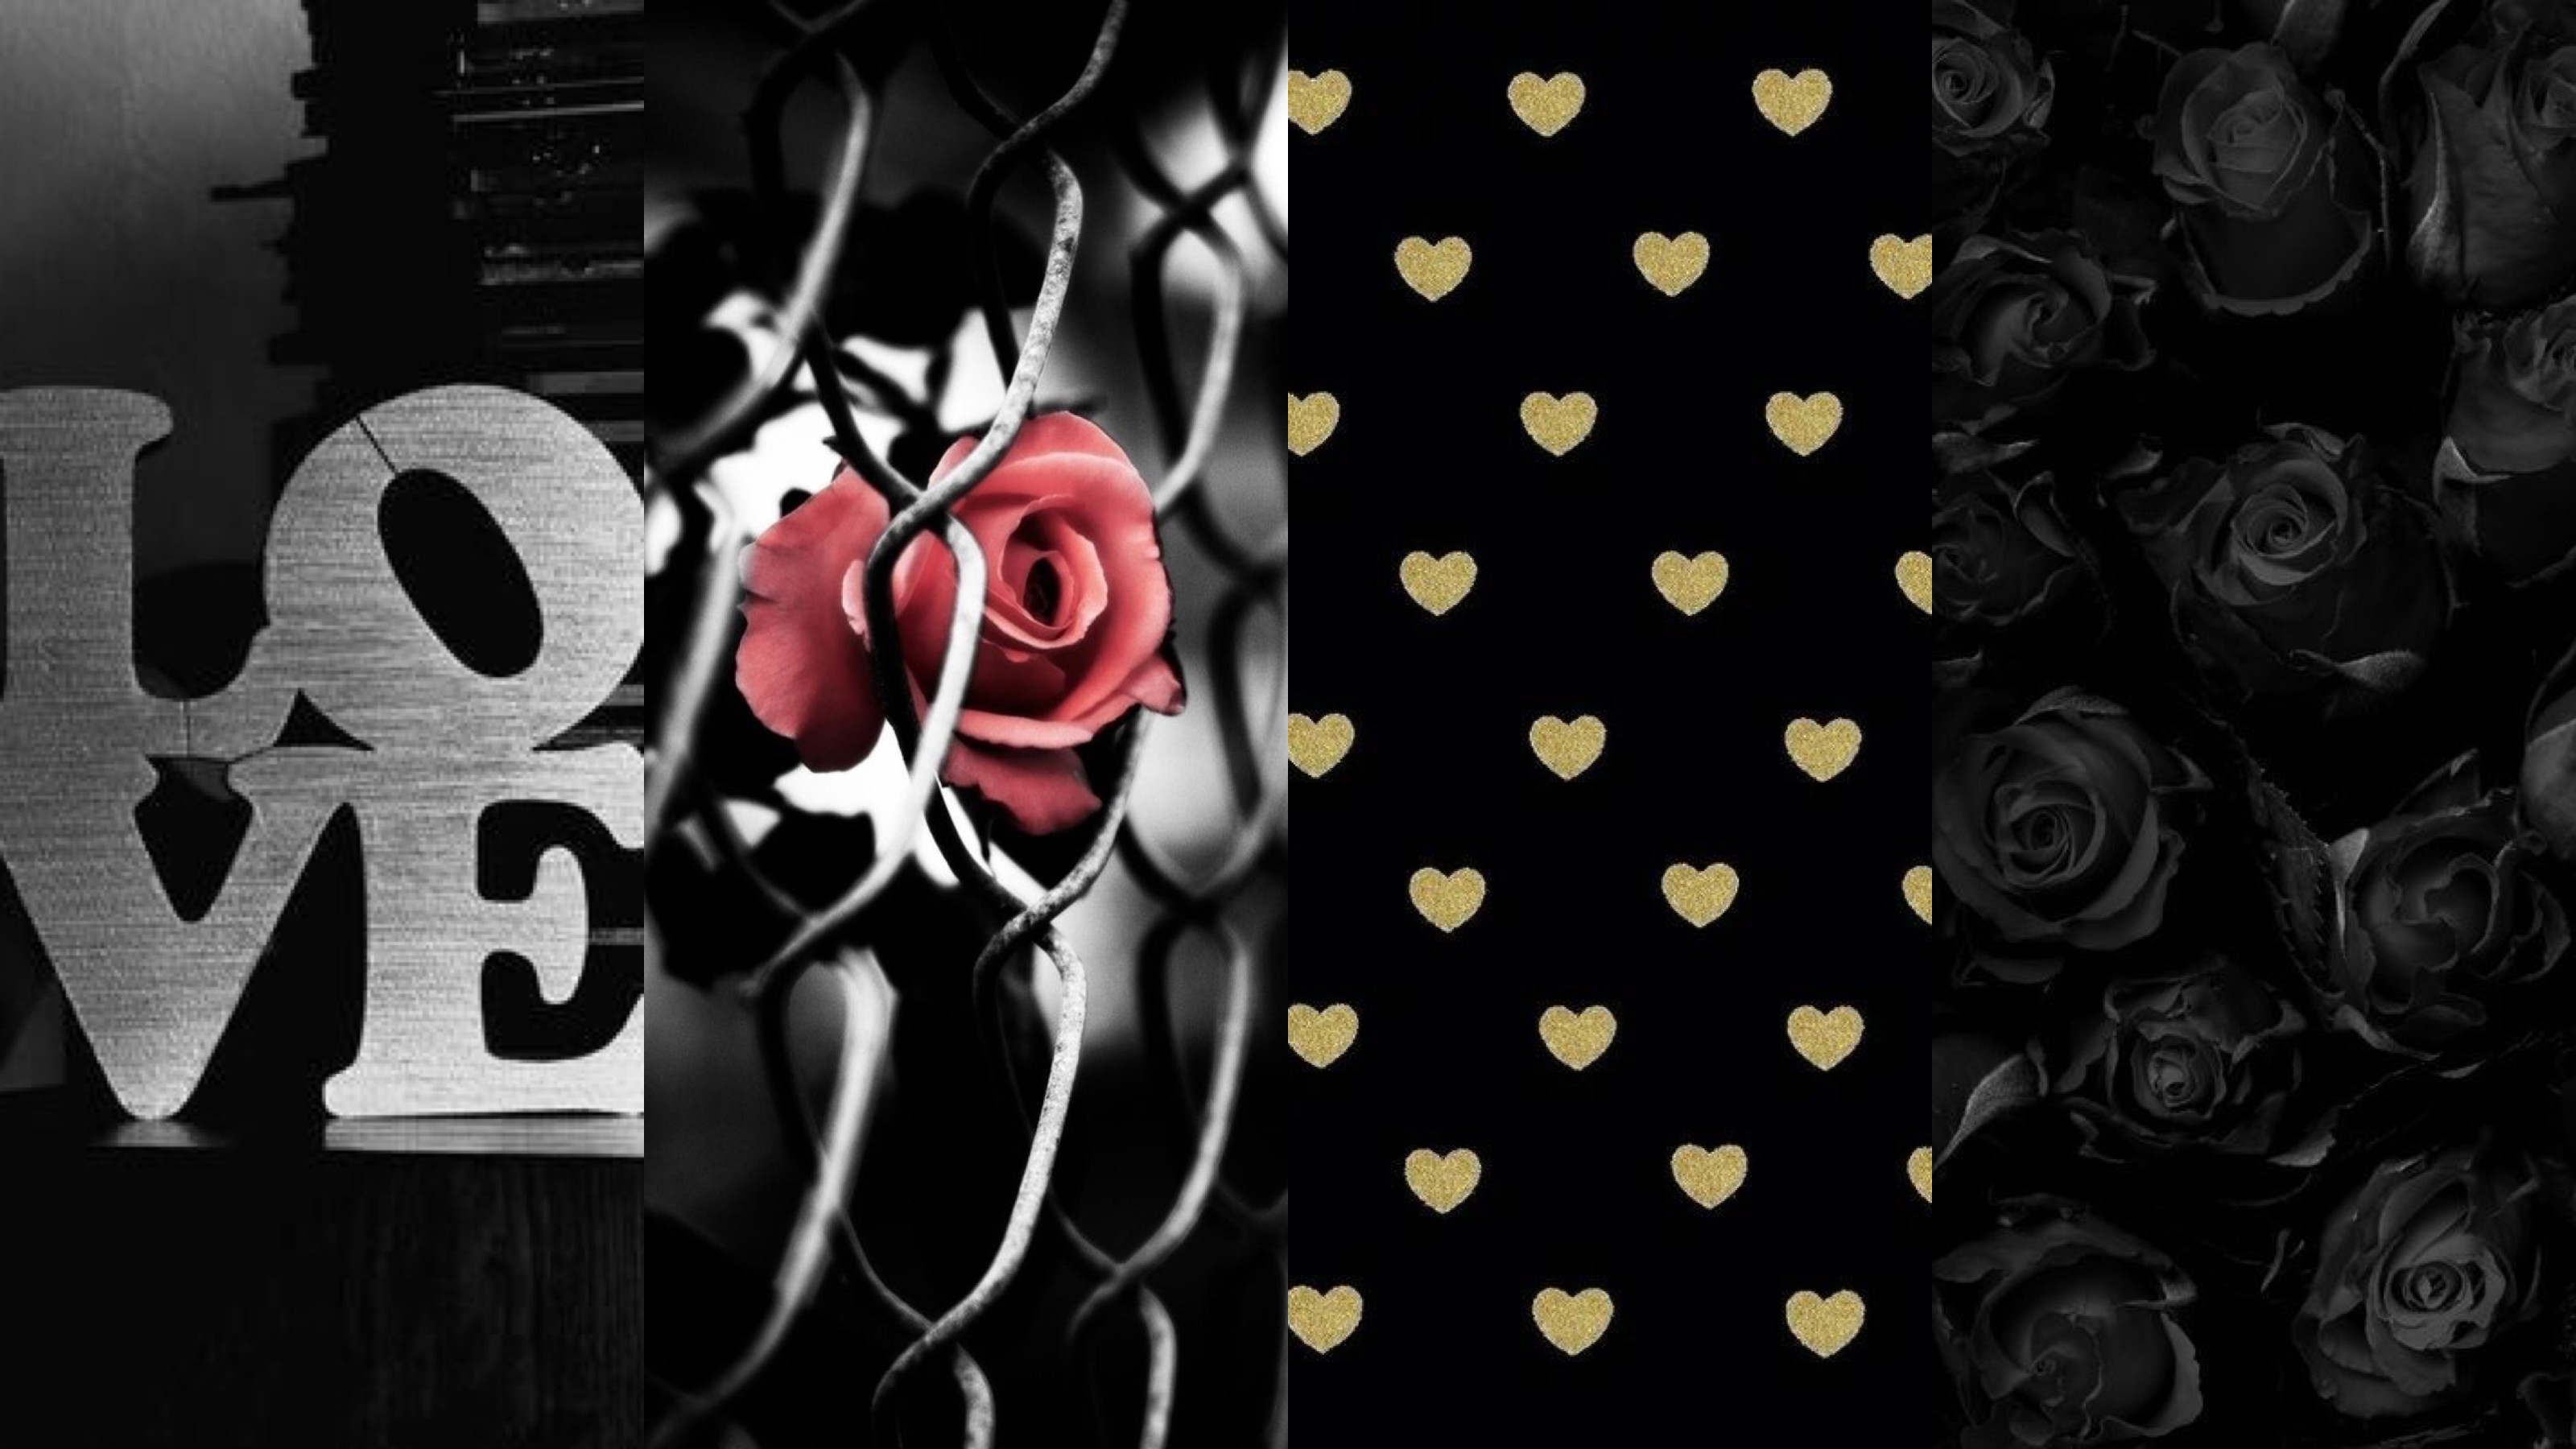 3200x1800 Love | Chain Link Rose | Gold Hearts | Black Roses